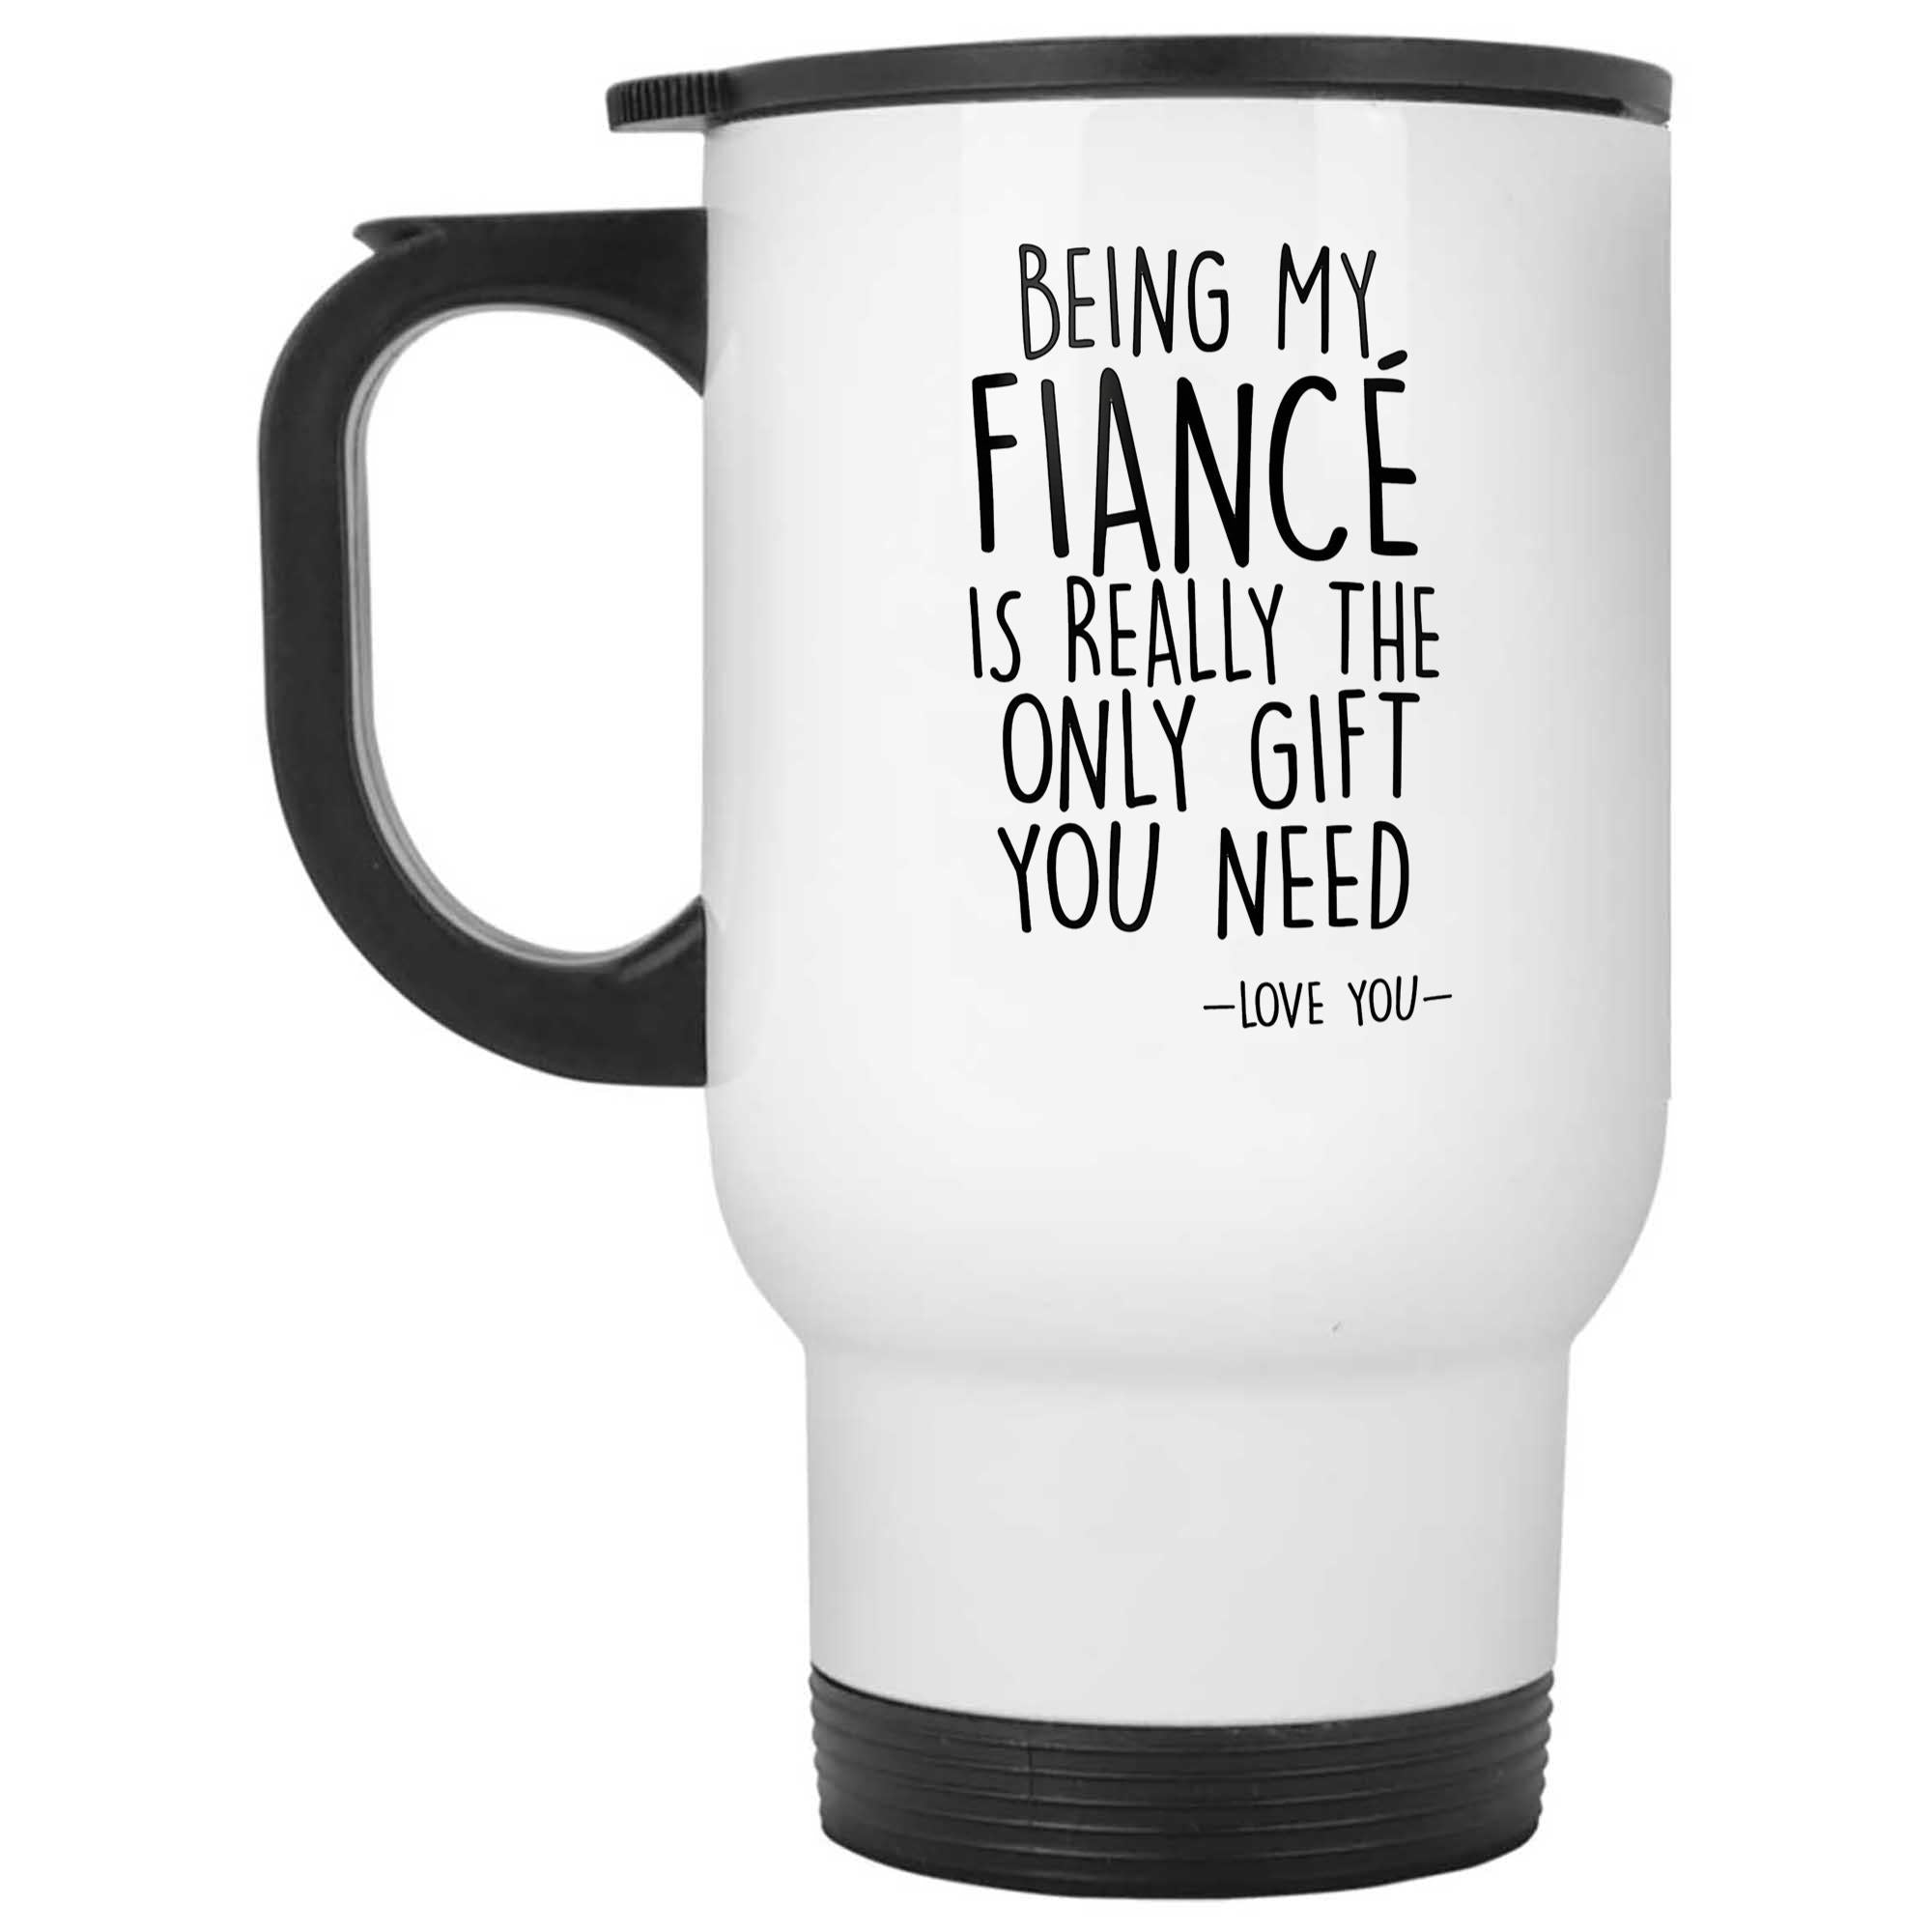 Skitongifts Funny Ceramic Novelty Coffee Mug Being My Fiance Is Really The Only You Need  Love You Funny For Best Fiance Christmas Birthday 46U7cIo